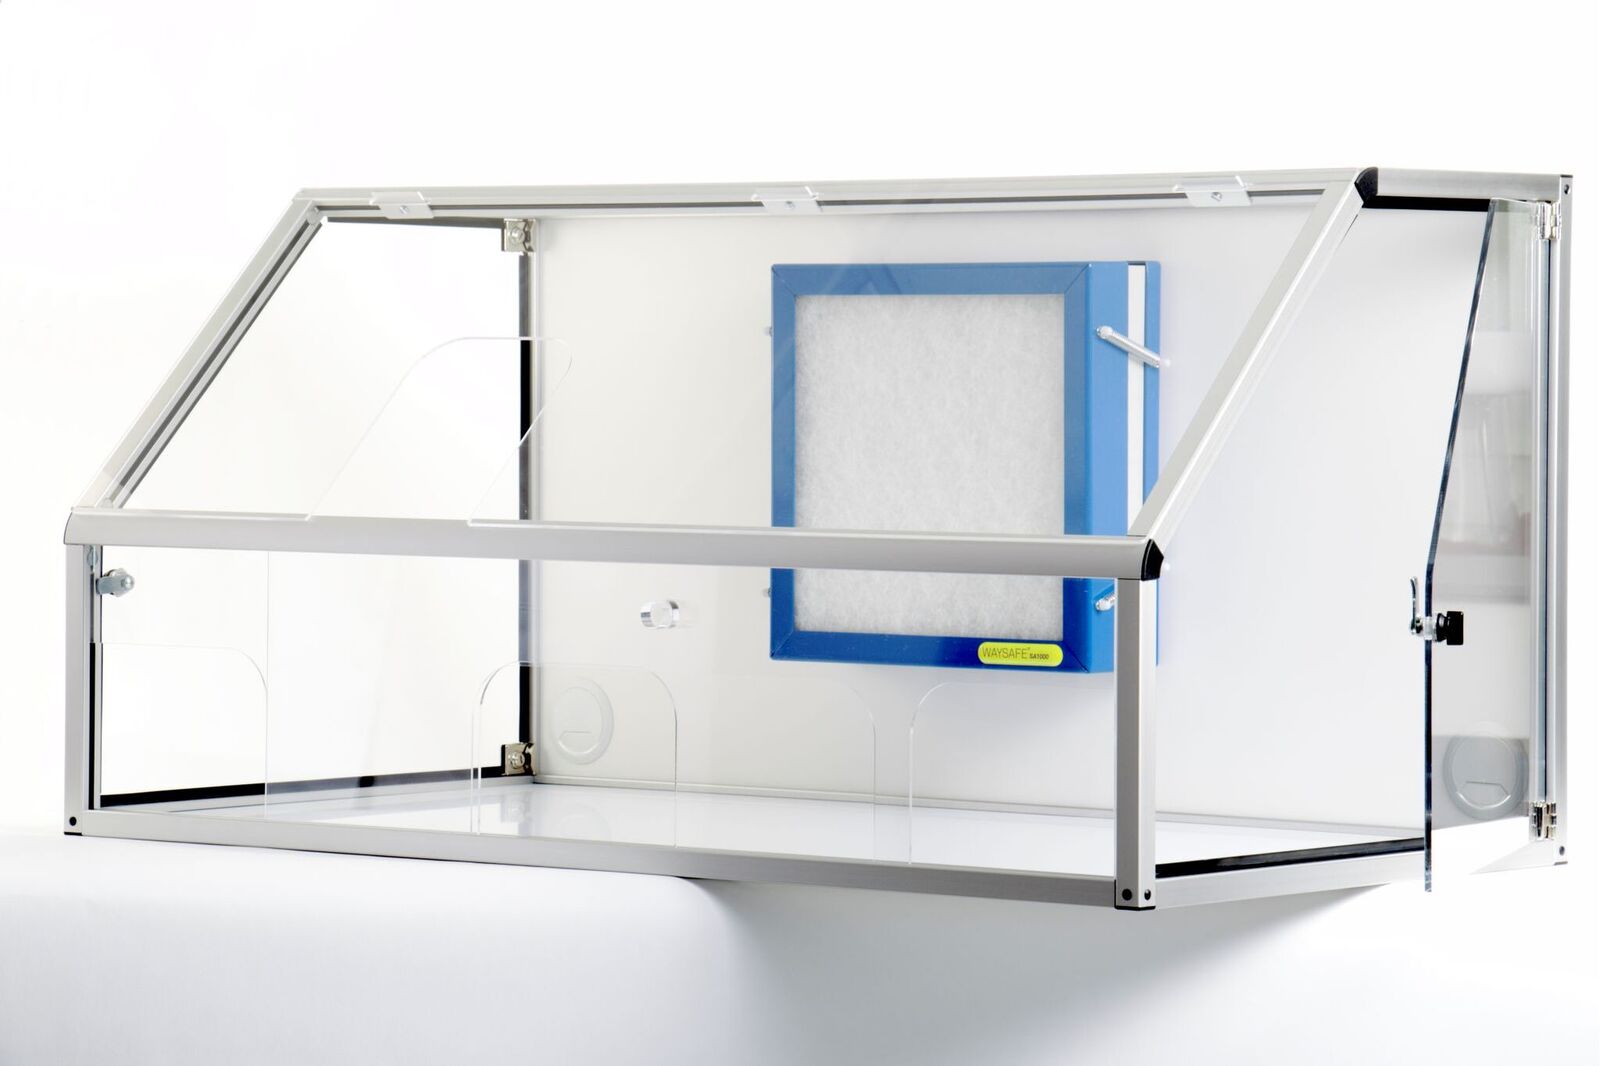 Waysafe SA1000 Large Sample Analysis Enclosure, 50 x 61 x 100cm , ample space for both sample preparation and microscopy in the simple enclosure